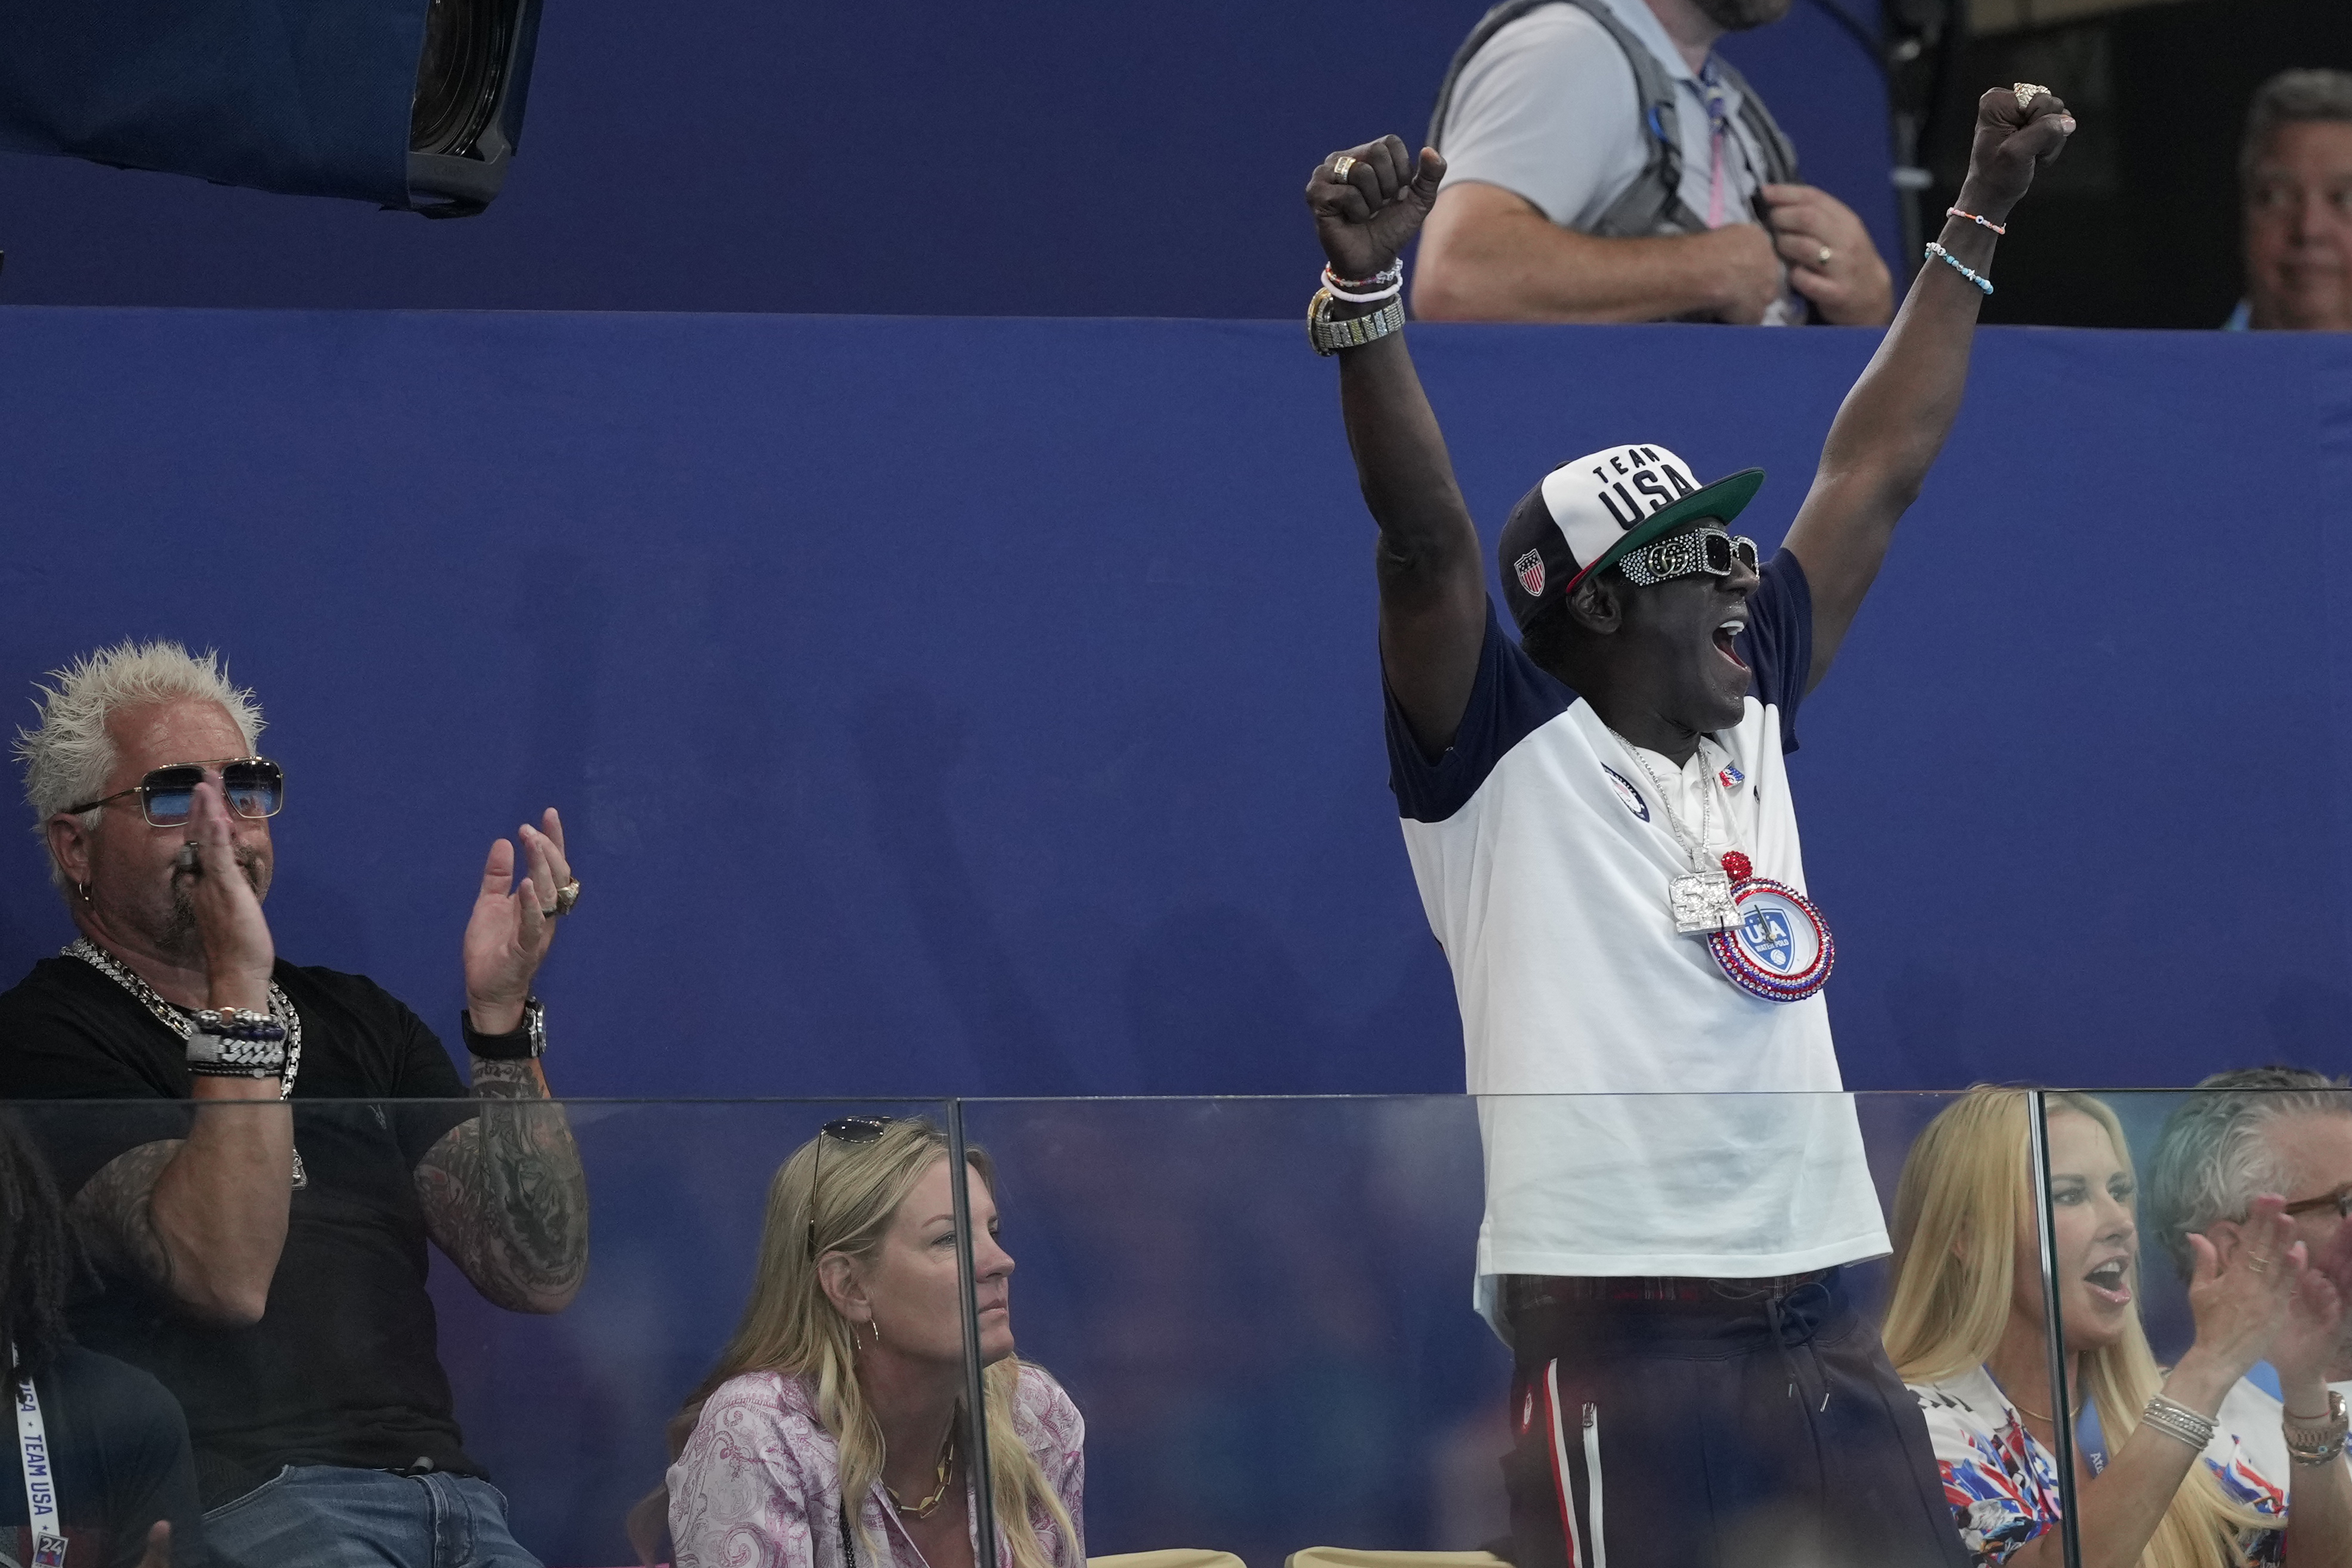 Flavor Flav sported U.S. national team attire as he cheered from the stands